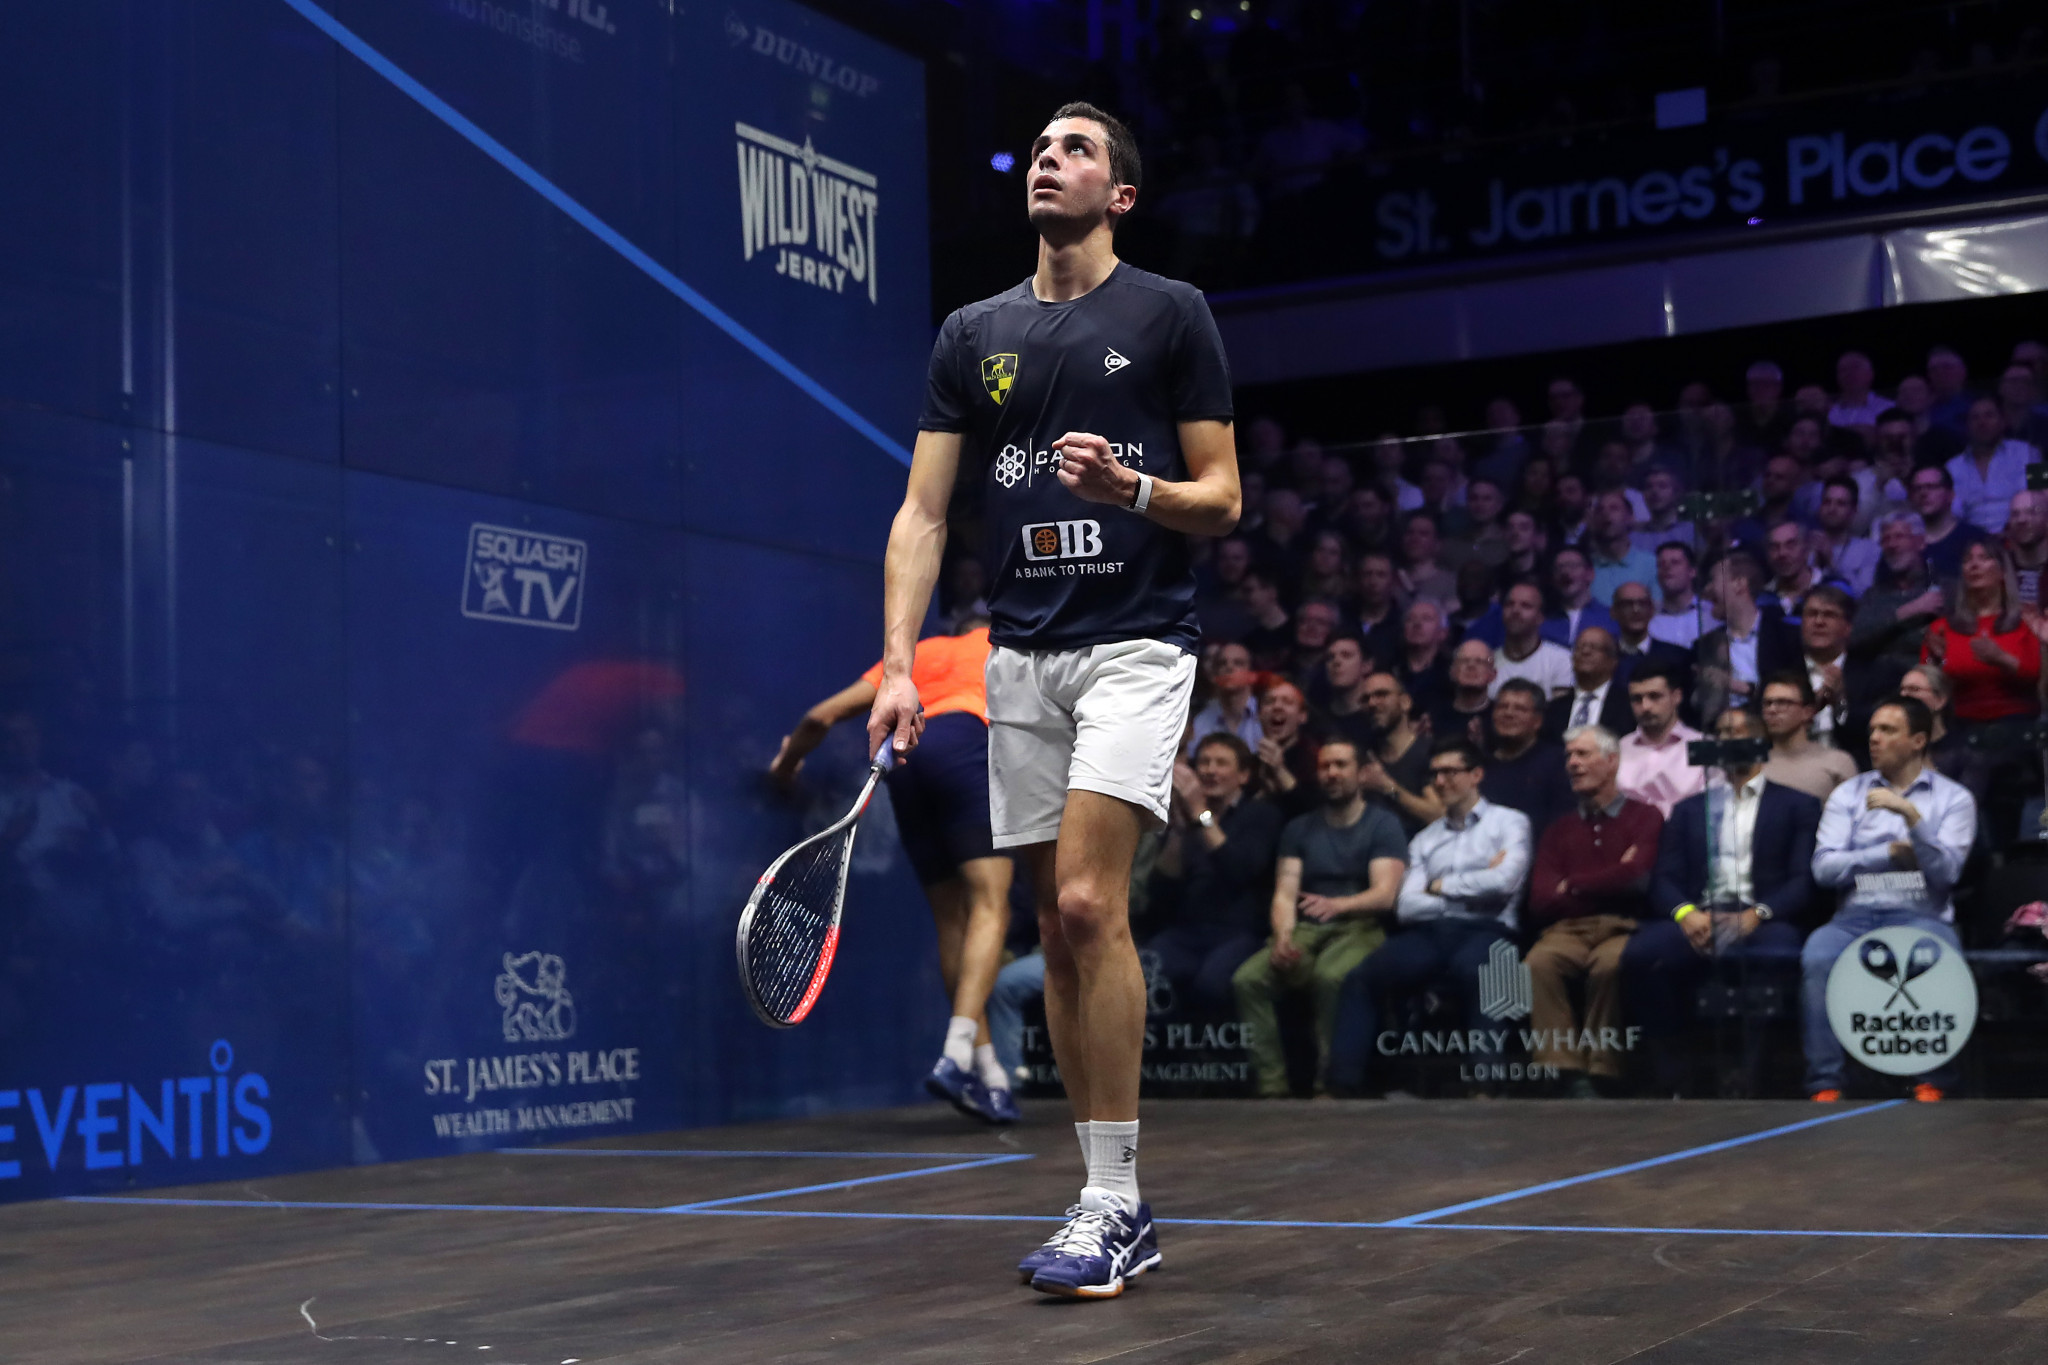 Egypt's world number one Ali Farag will attempt to defend his US Open title in Philadelphia ©Getty Images